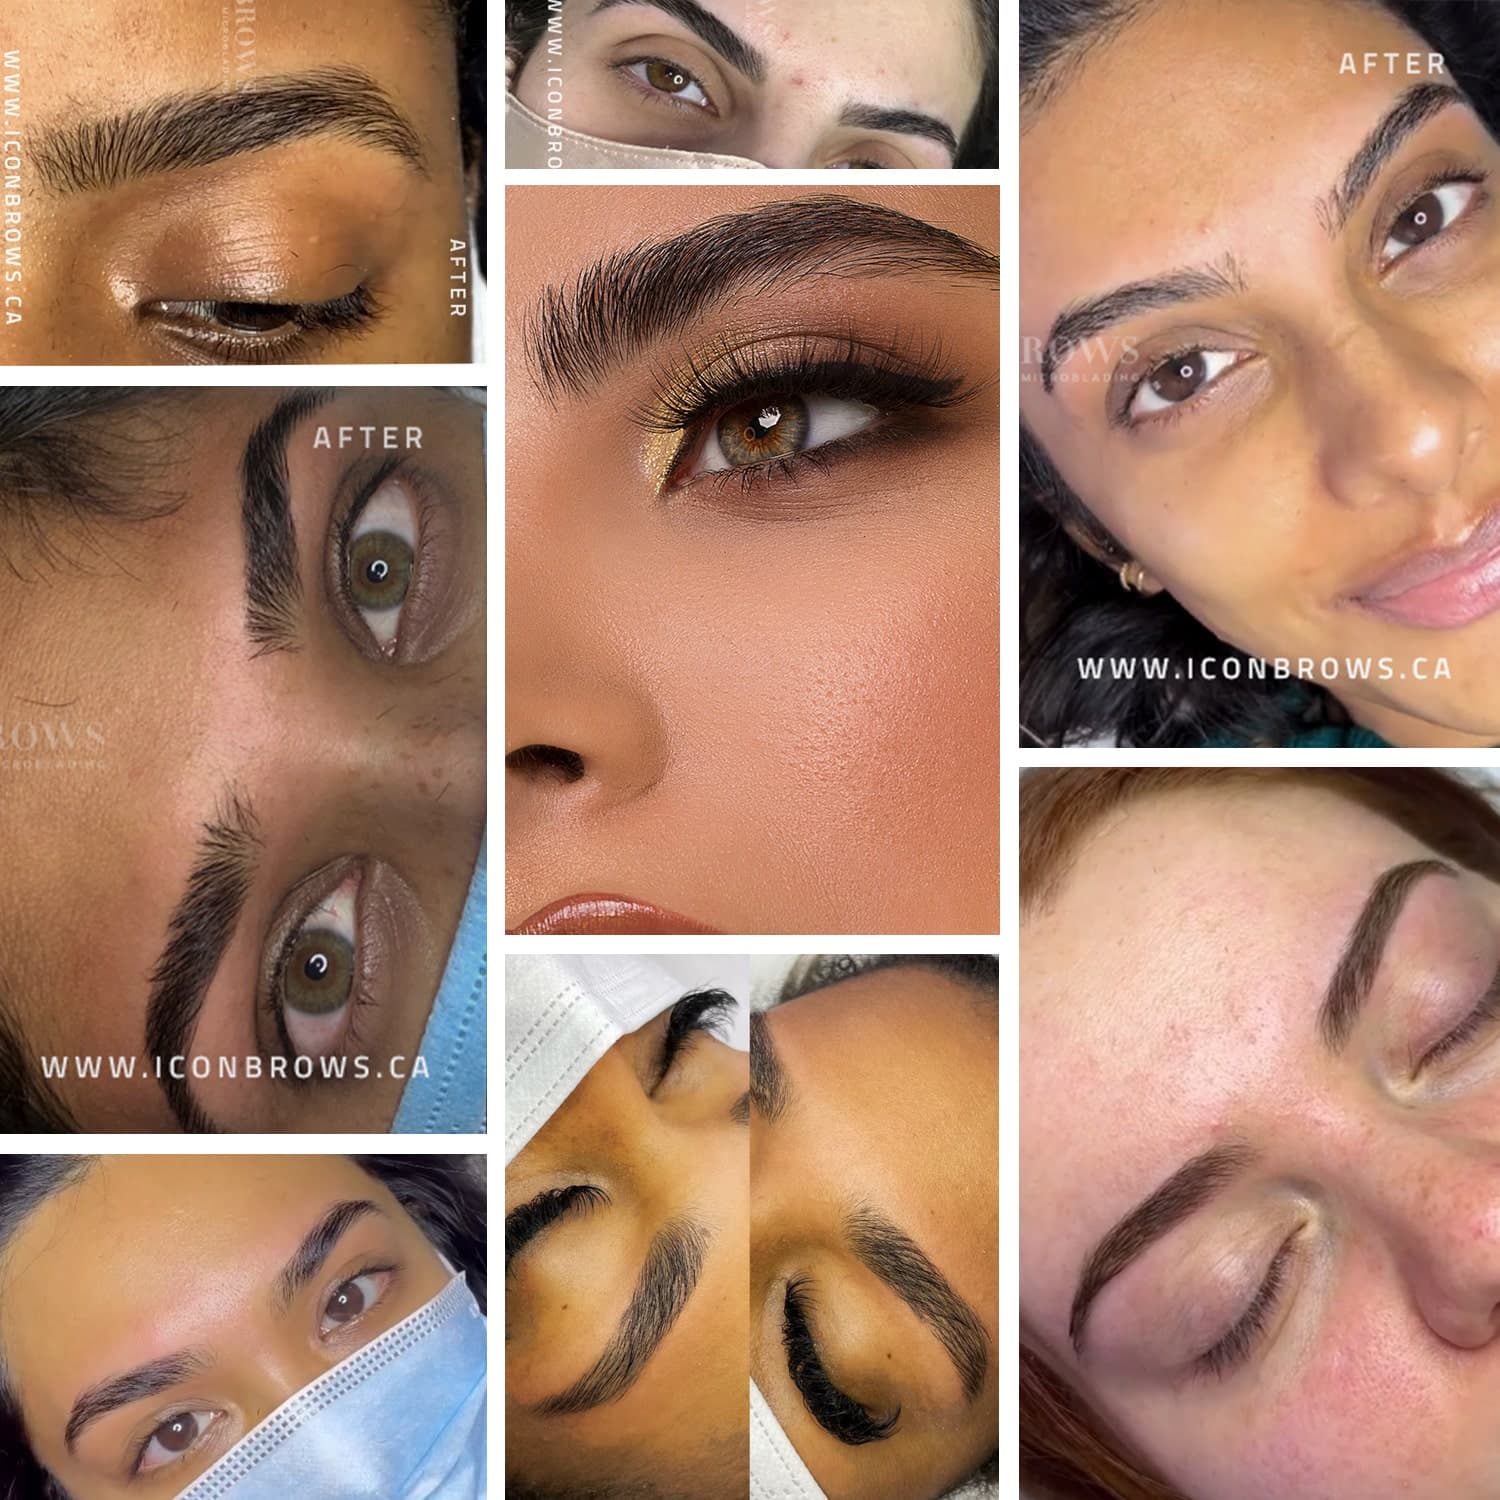 Lash Extensions Training with Iconbrows Academy Toronto's Best Eyelash Extensions Courses